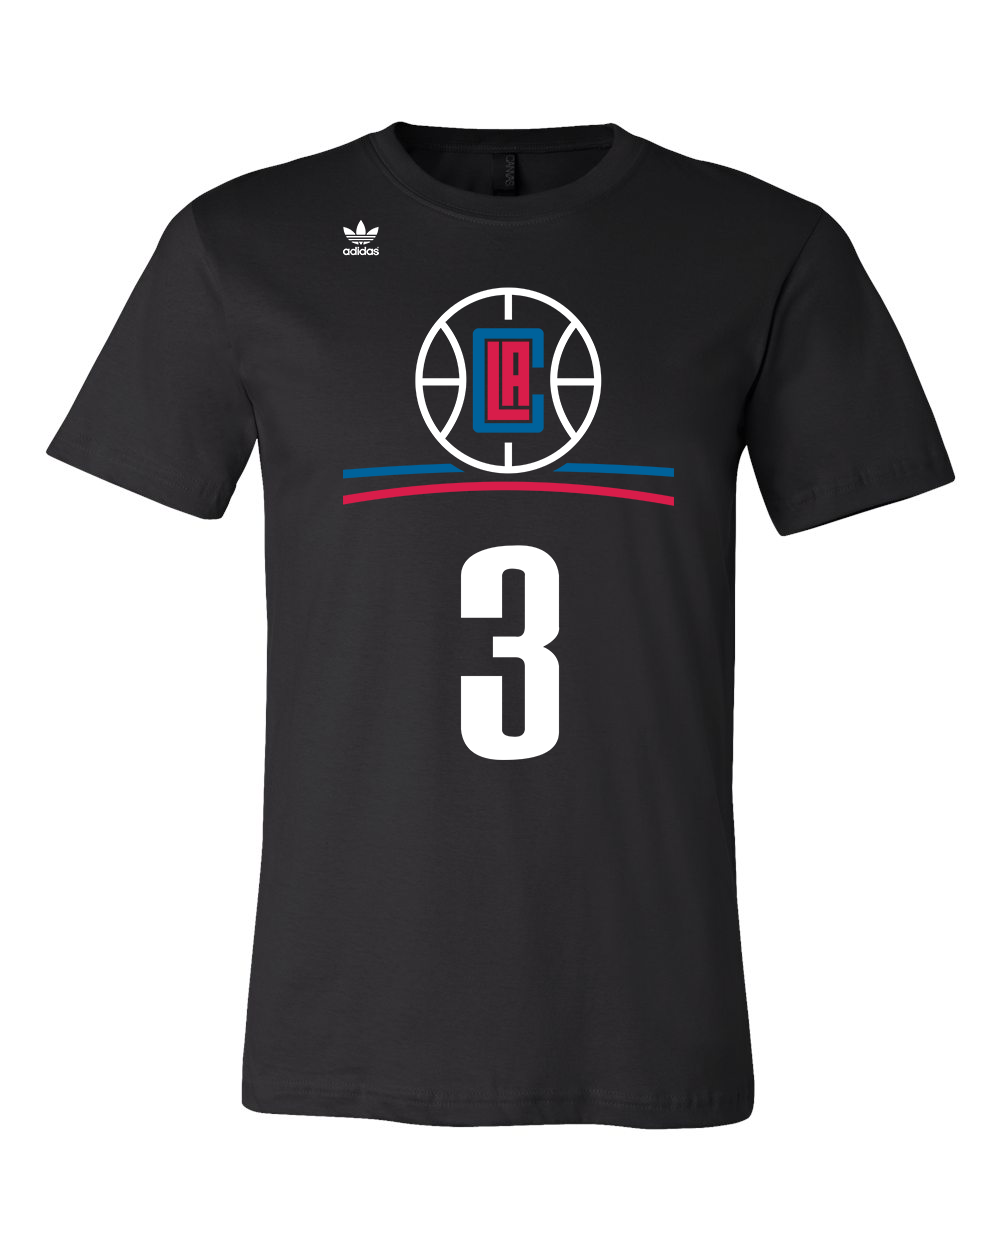 clippers shirt jersey